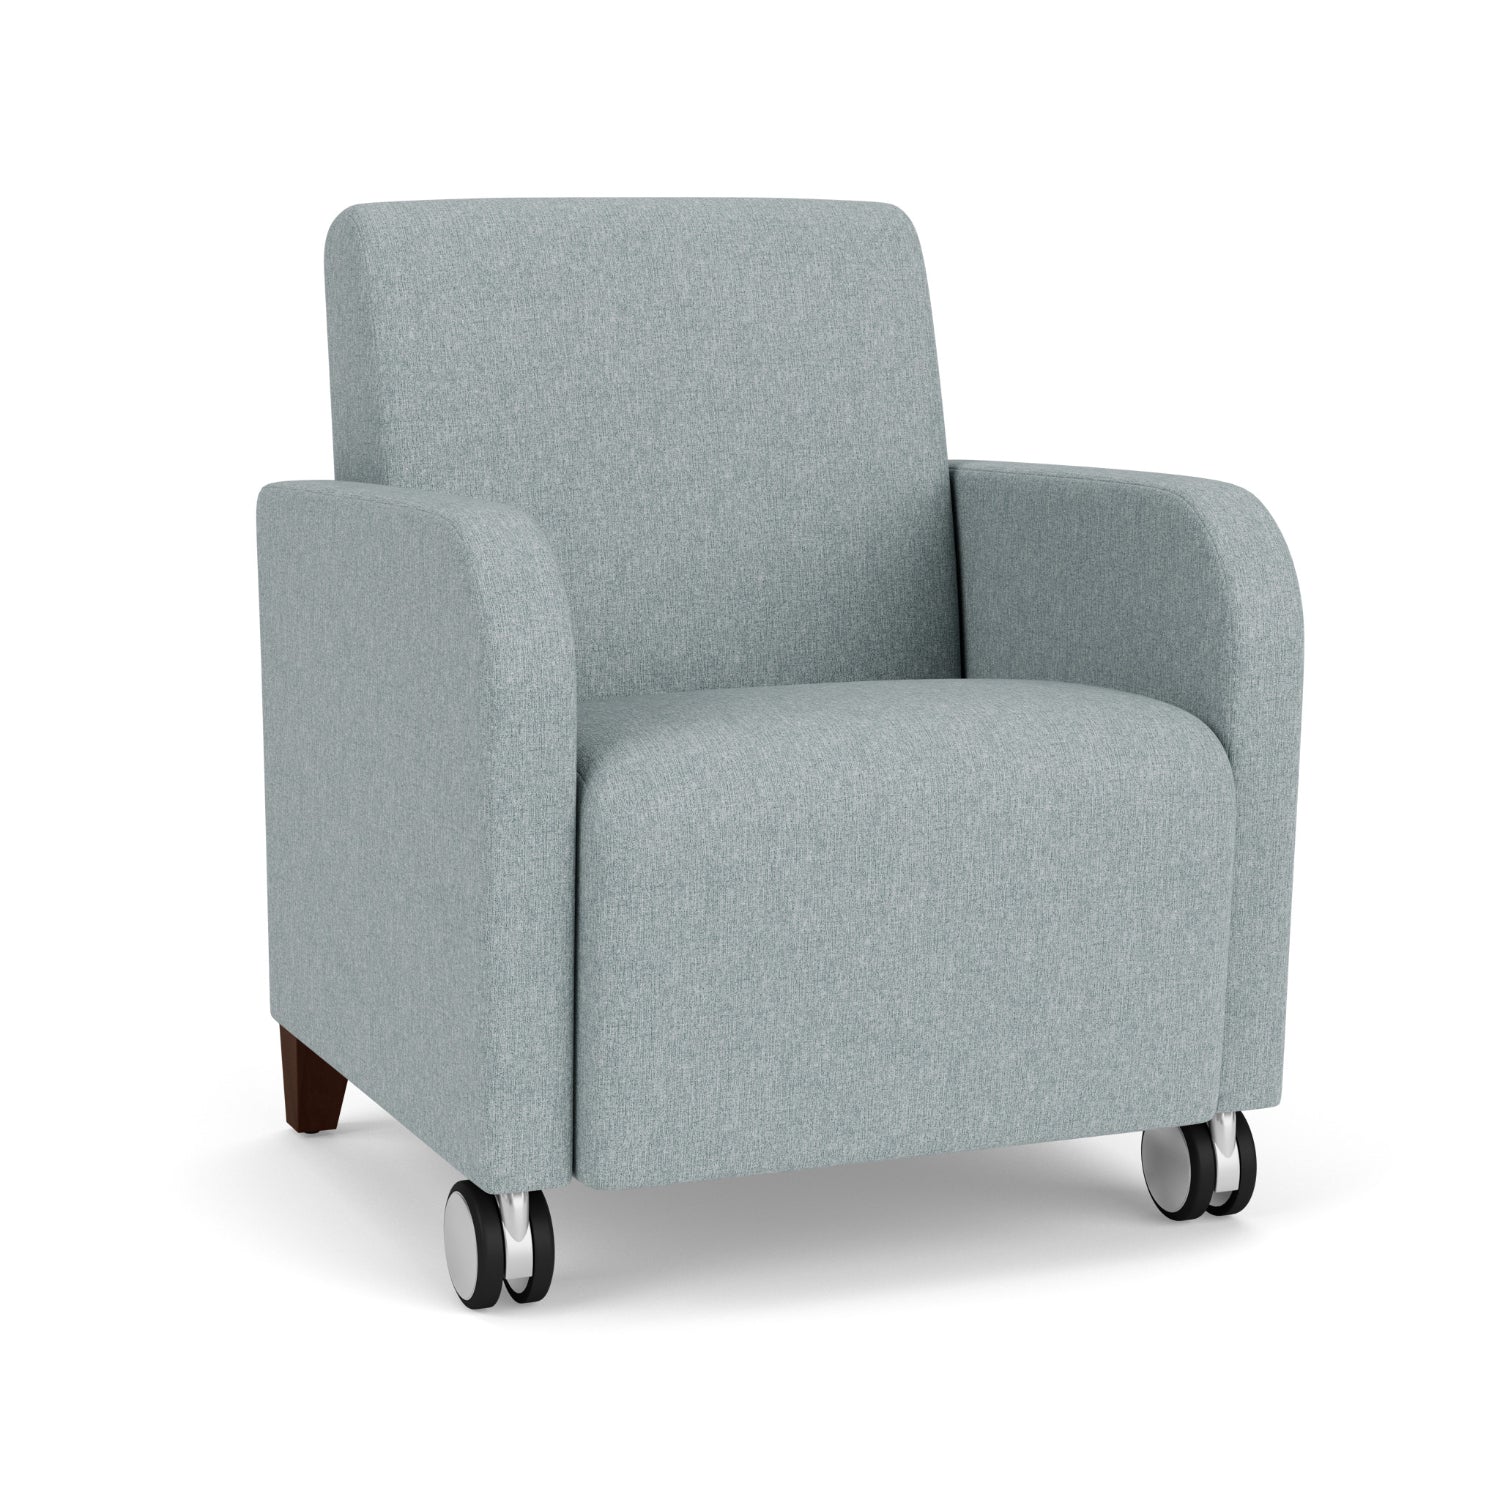 Siena Collection Reception Seating, Guest Chair with Front Casters, 400 lb. Capacity, Healthcare Vinyl Upholstery, FREE SHIPPING